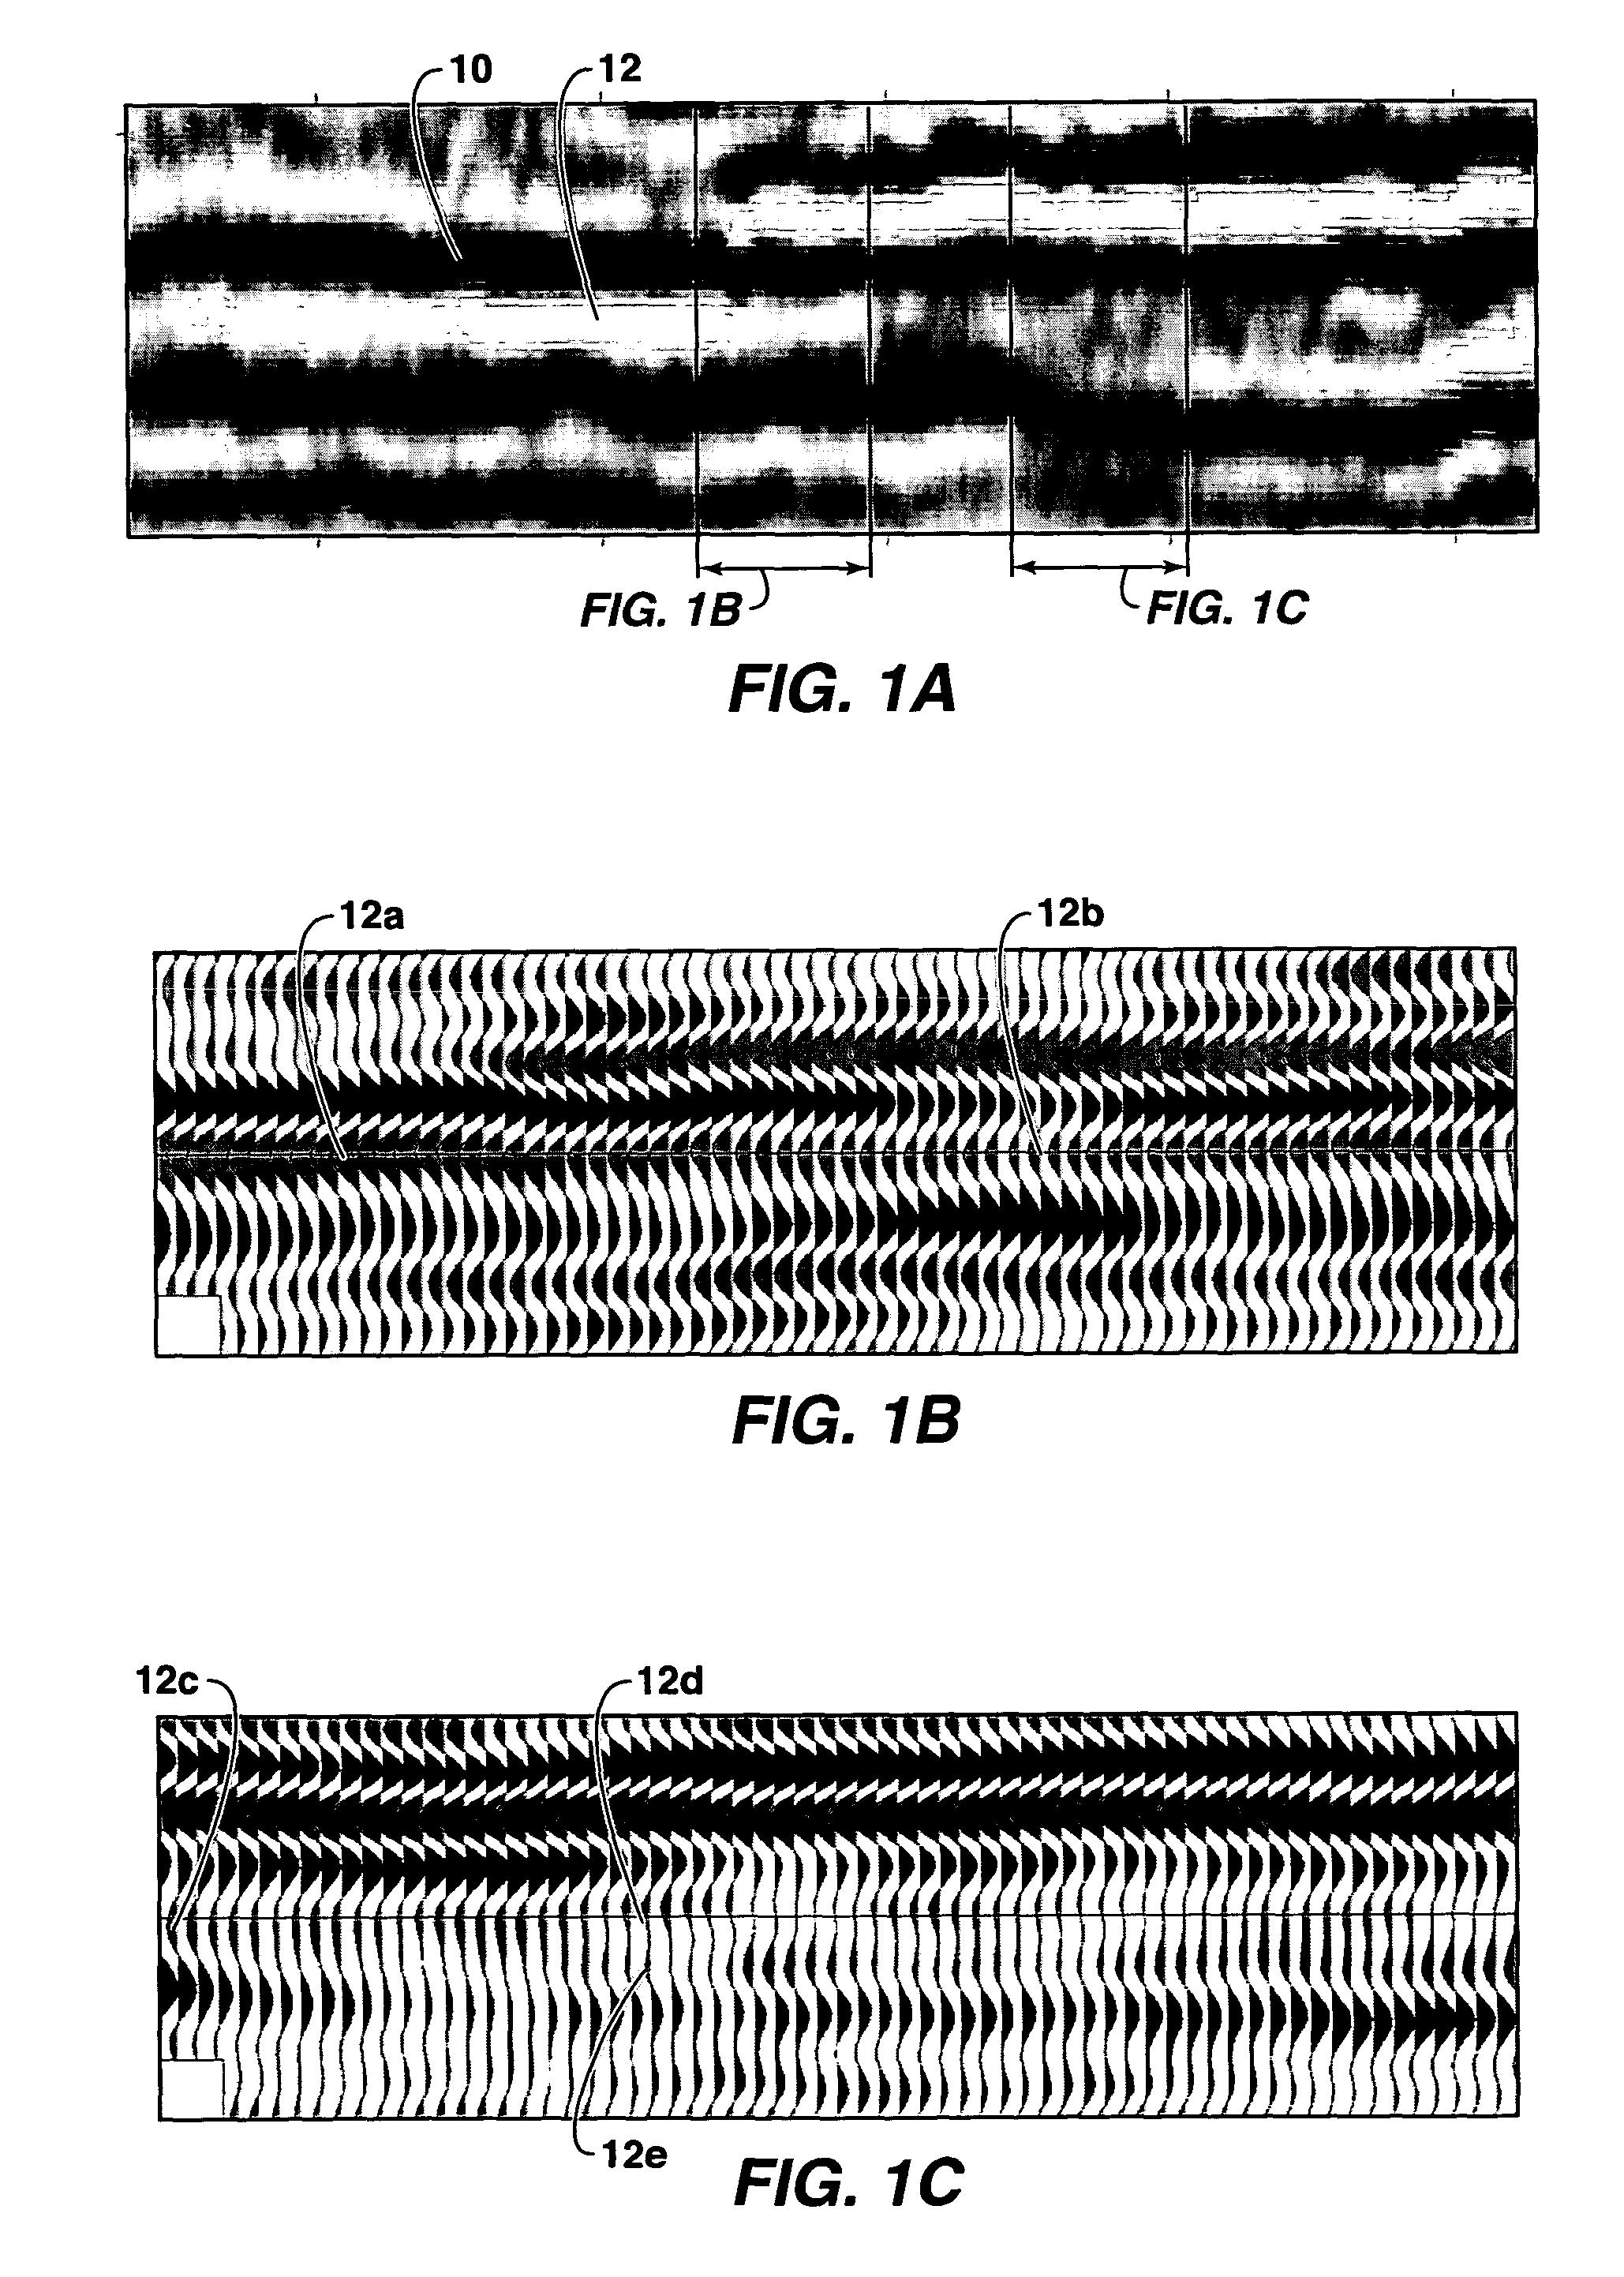 Method for performing stratigraphically-based seed detection in a 3-D seismic data volume